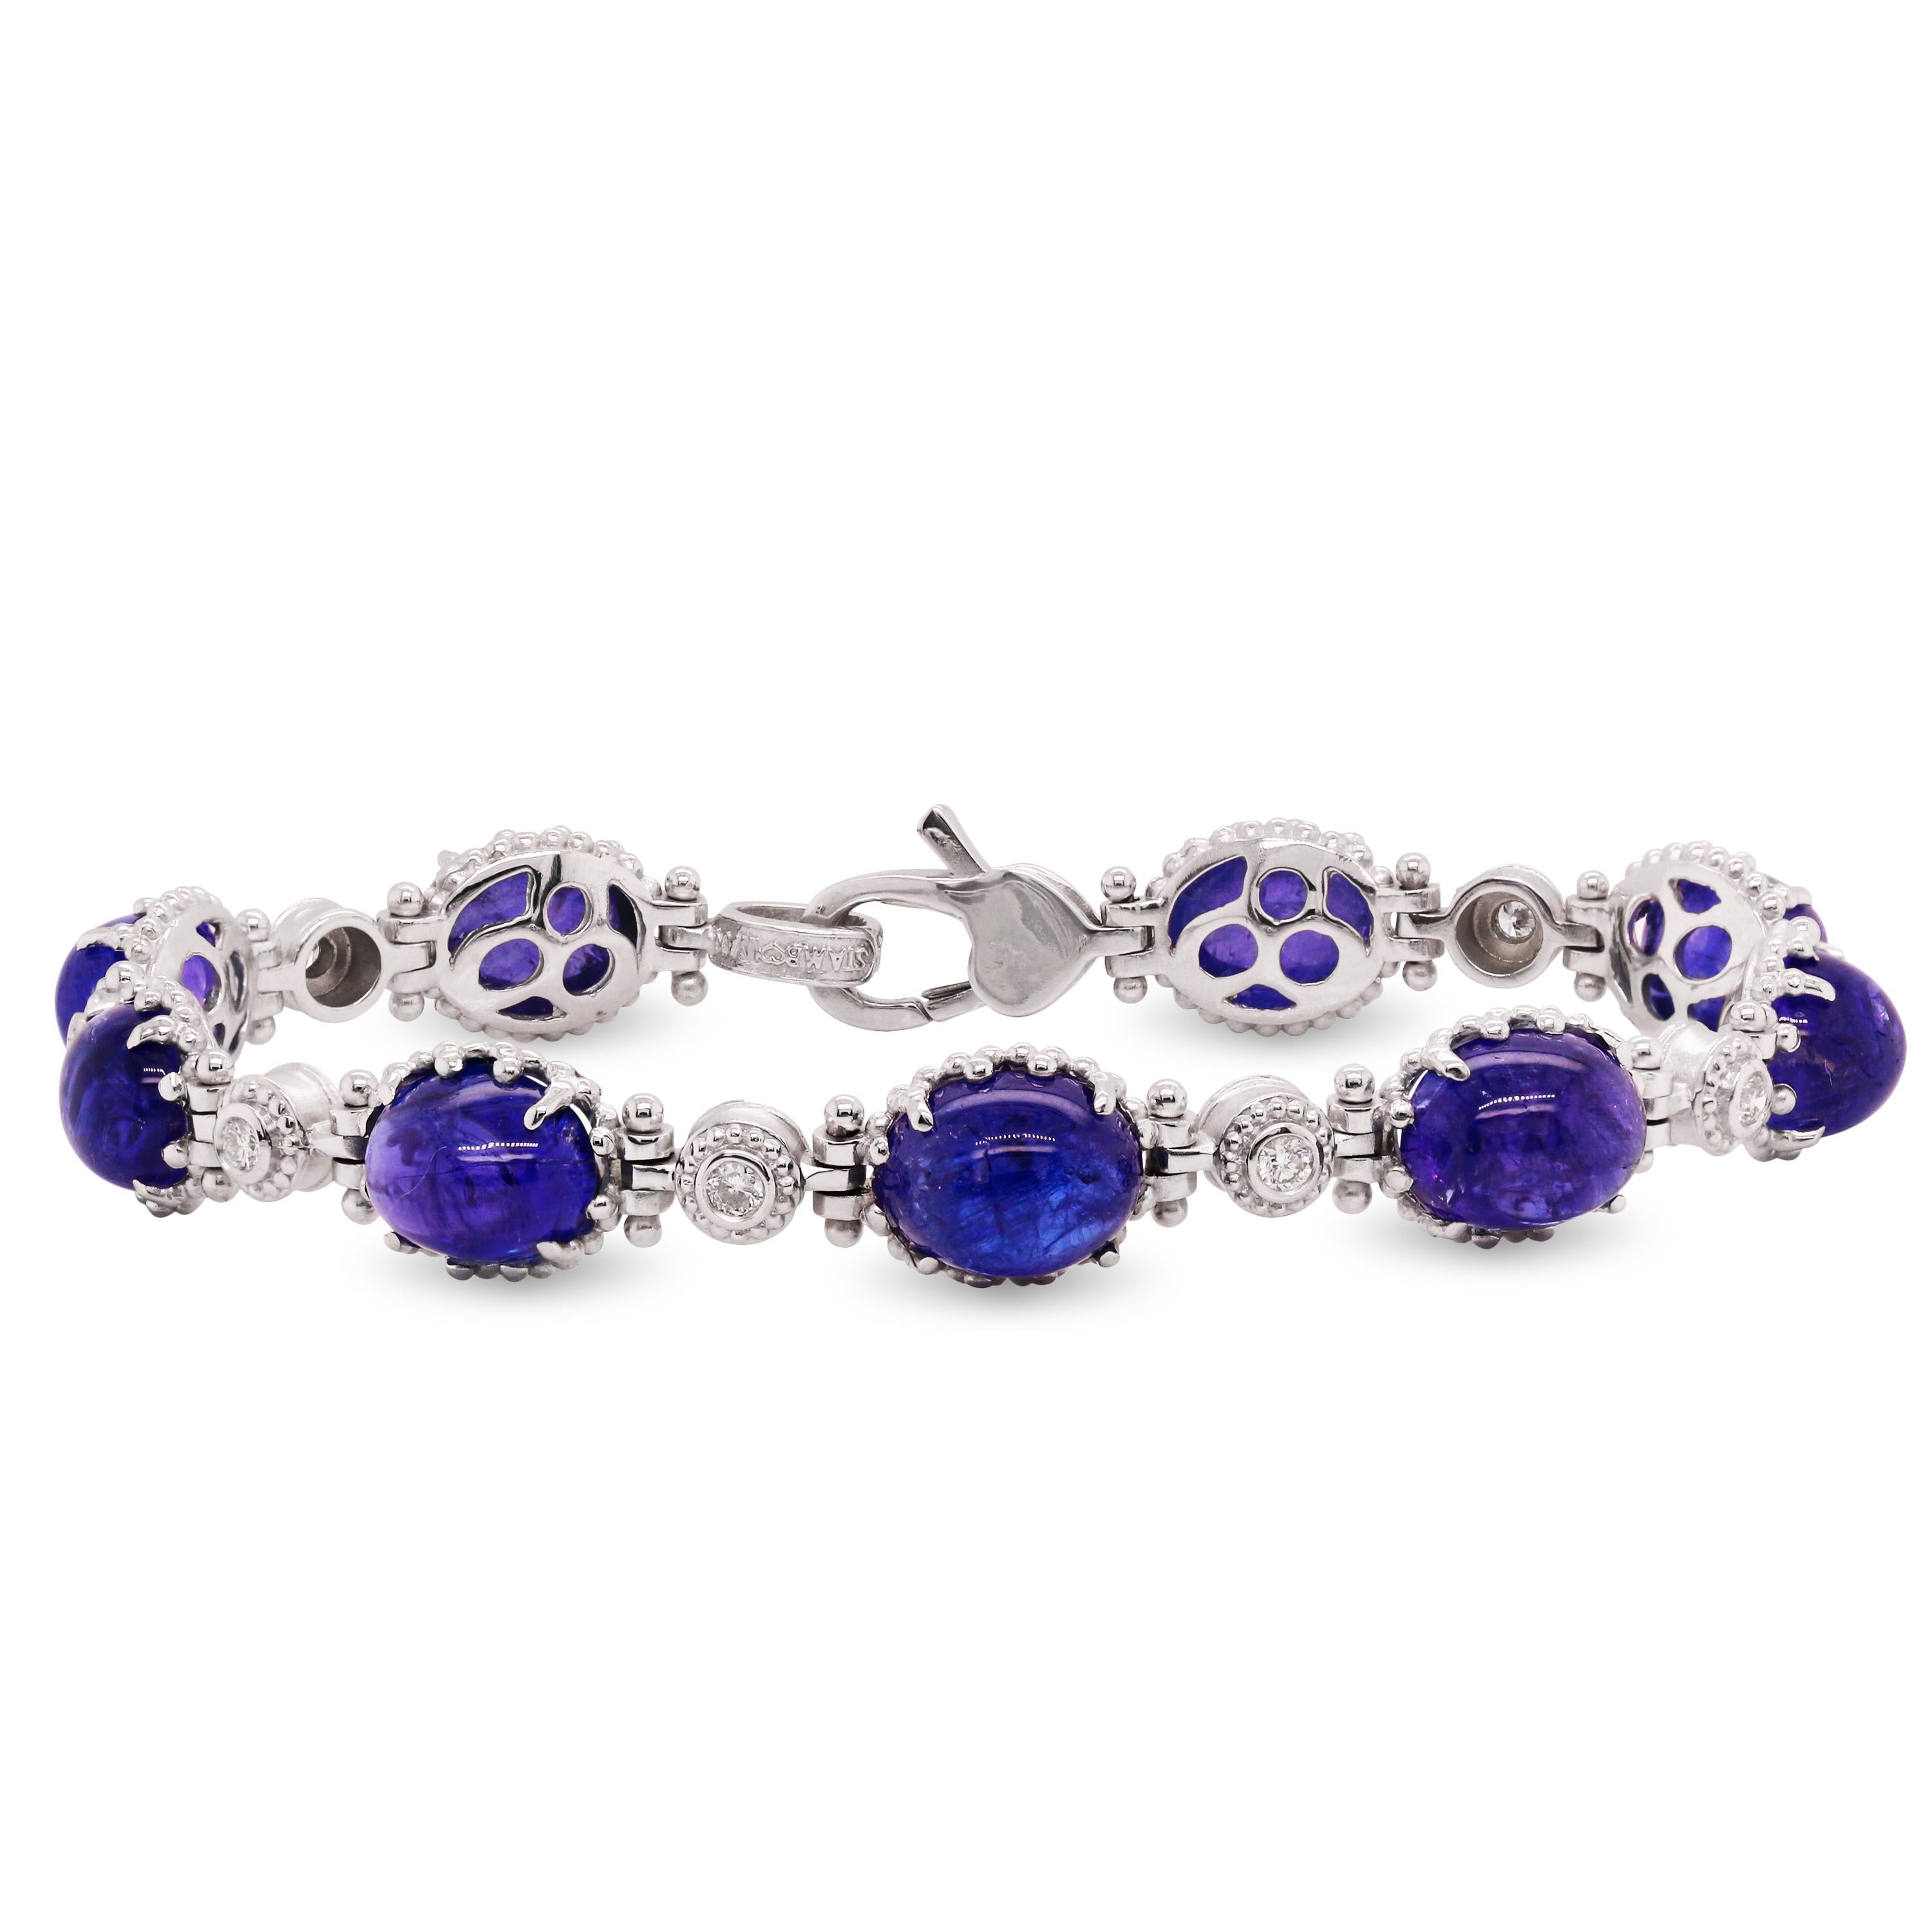 Stambolian 18 Karat White Gold Diamond Cabochon Oval Tanzanite Bracelet

This fun and everyday bracelet is made in solid 18k white gold and features nine cabochon-cut, oval Tanzanites with bezel set diamonds between each section.

Apprx. 28.87 carat